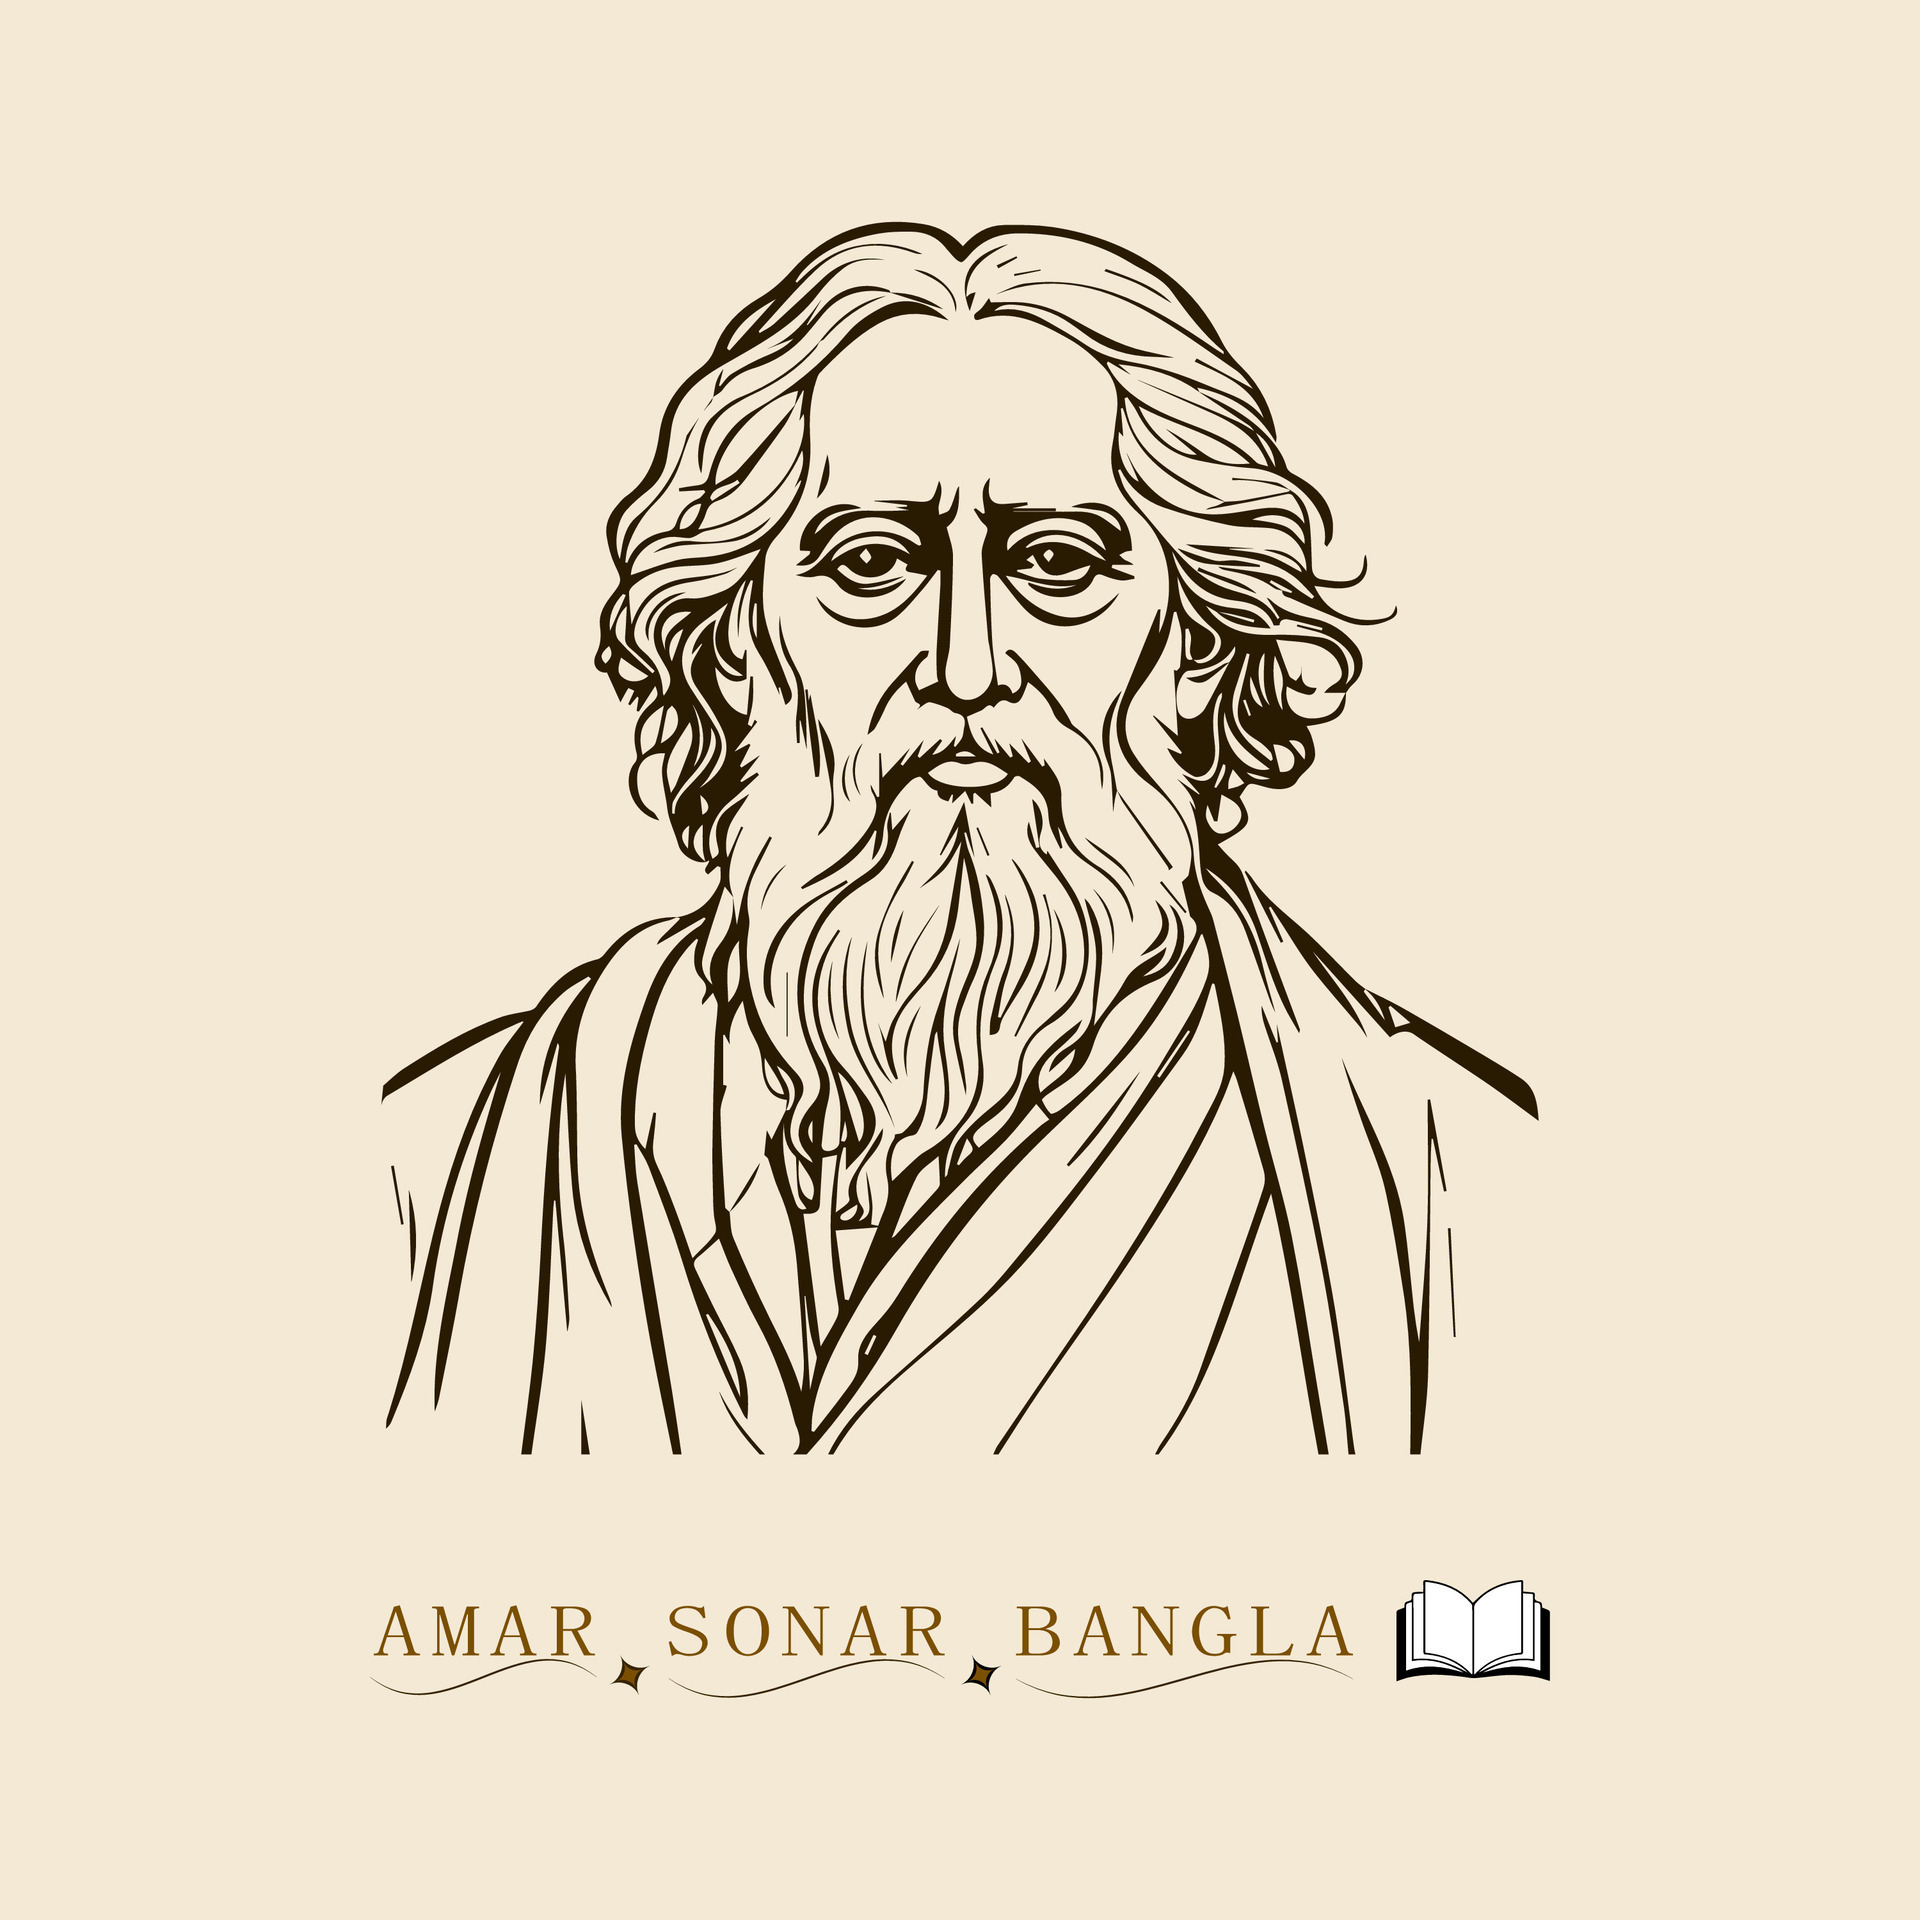 How to draw Rabindranath Tagore - YouTube-saigonsouth.com.vn